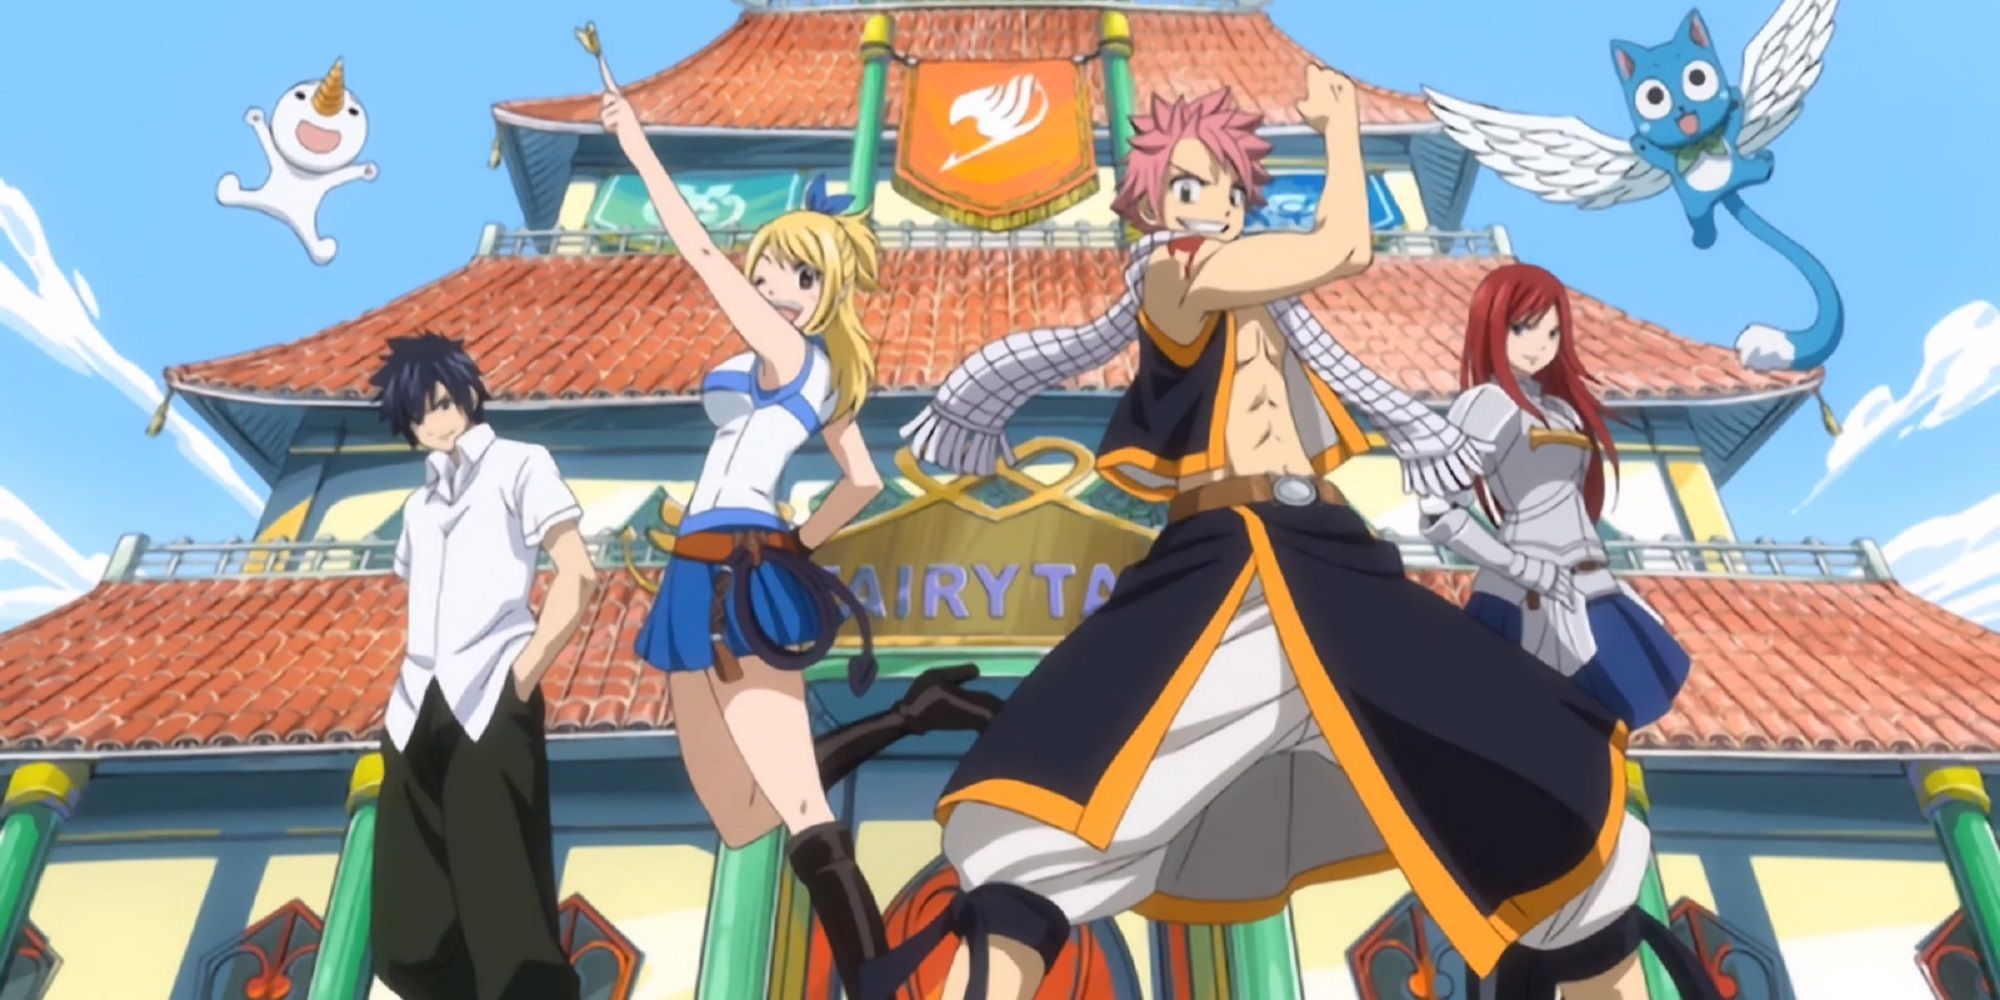 Top 10 Fairy Tail Openings - TheTopTens